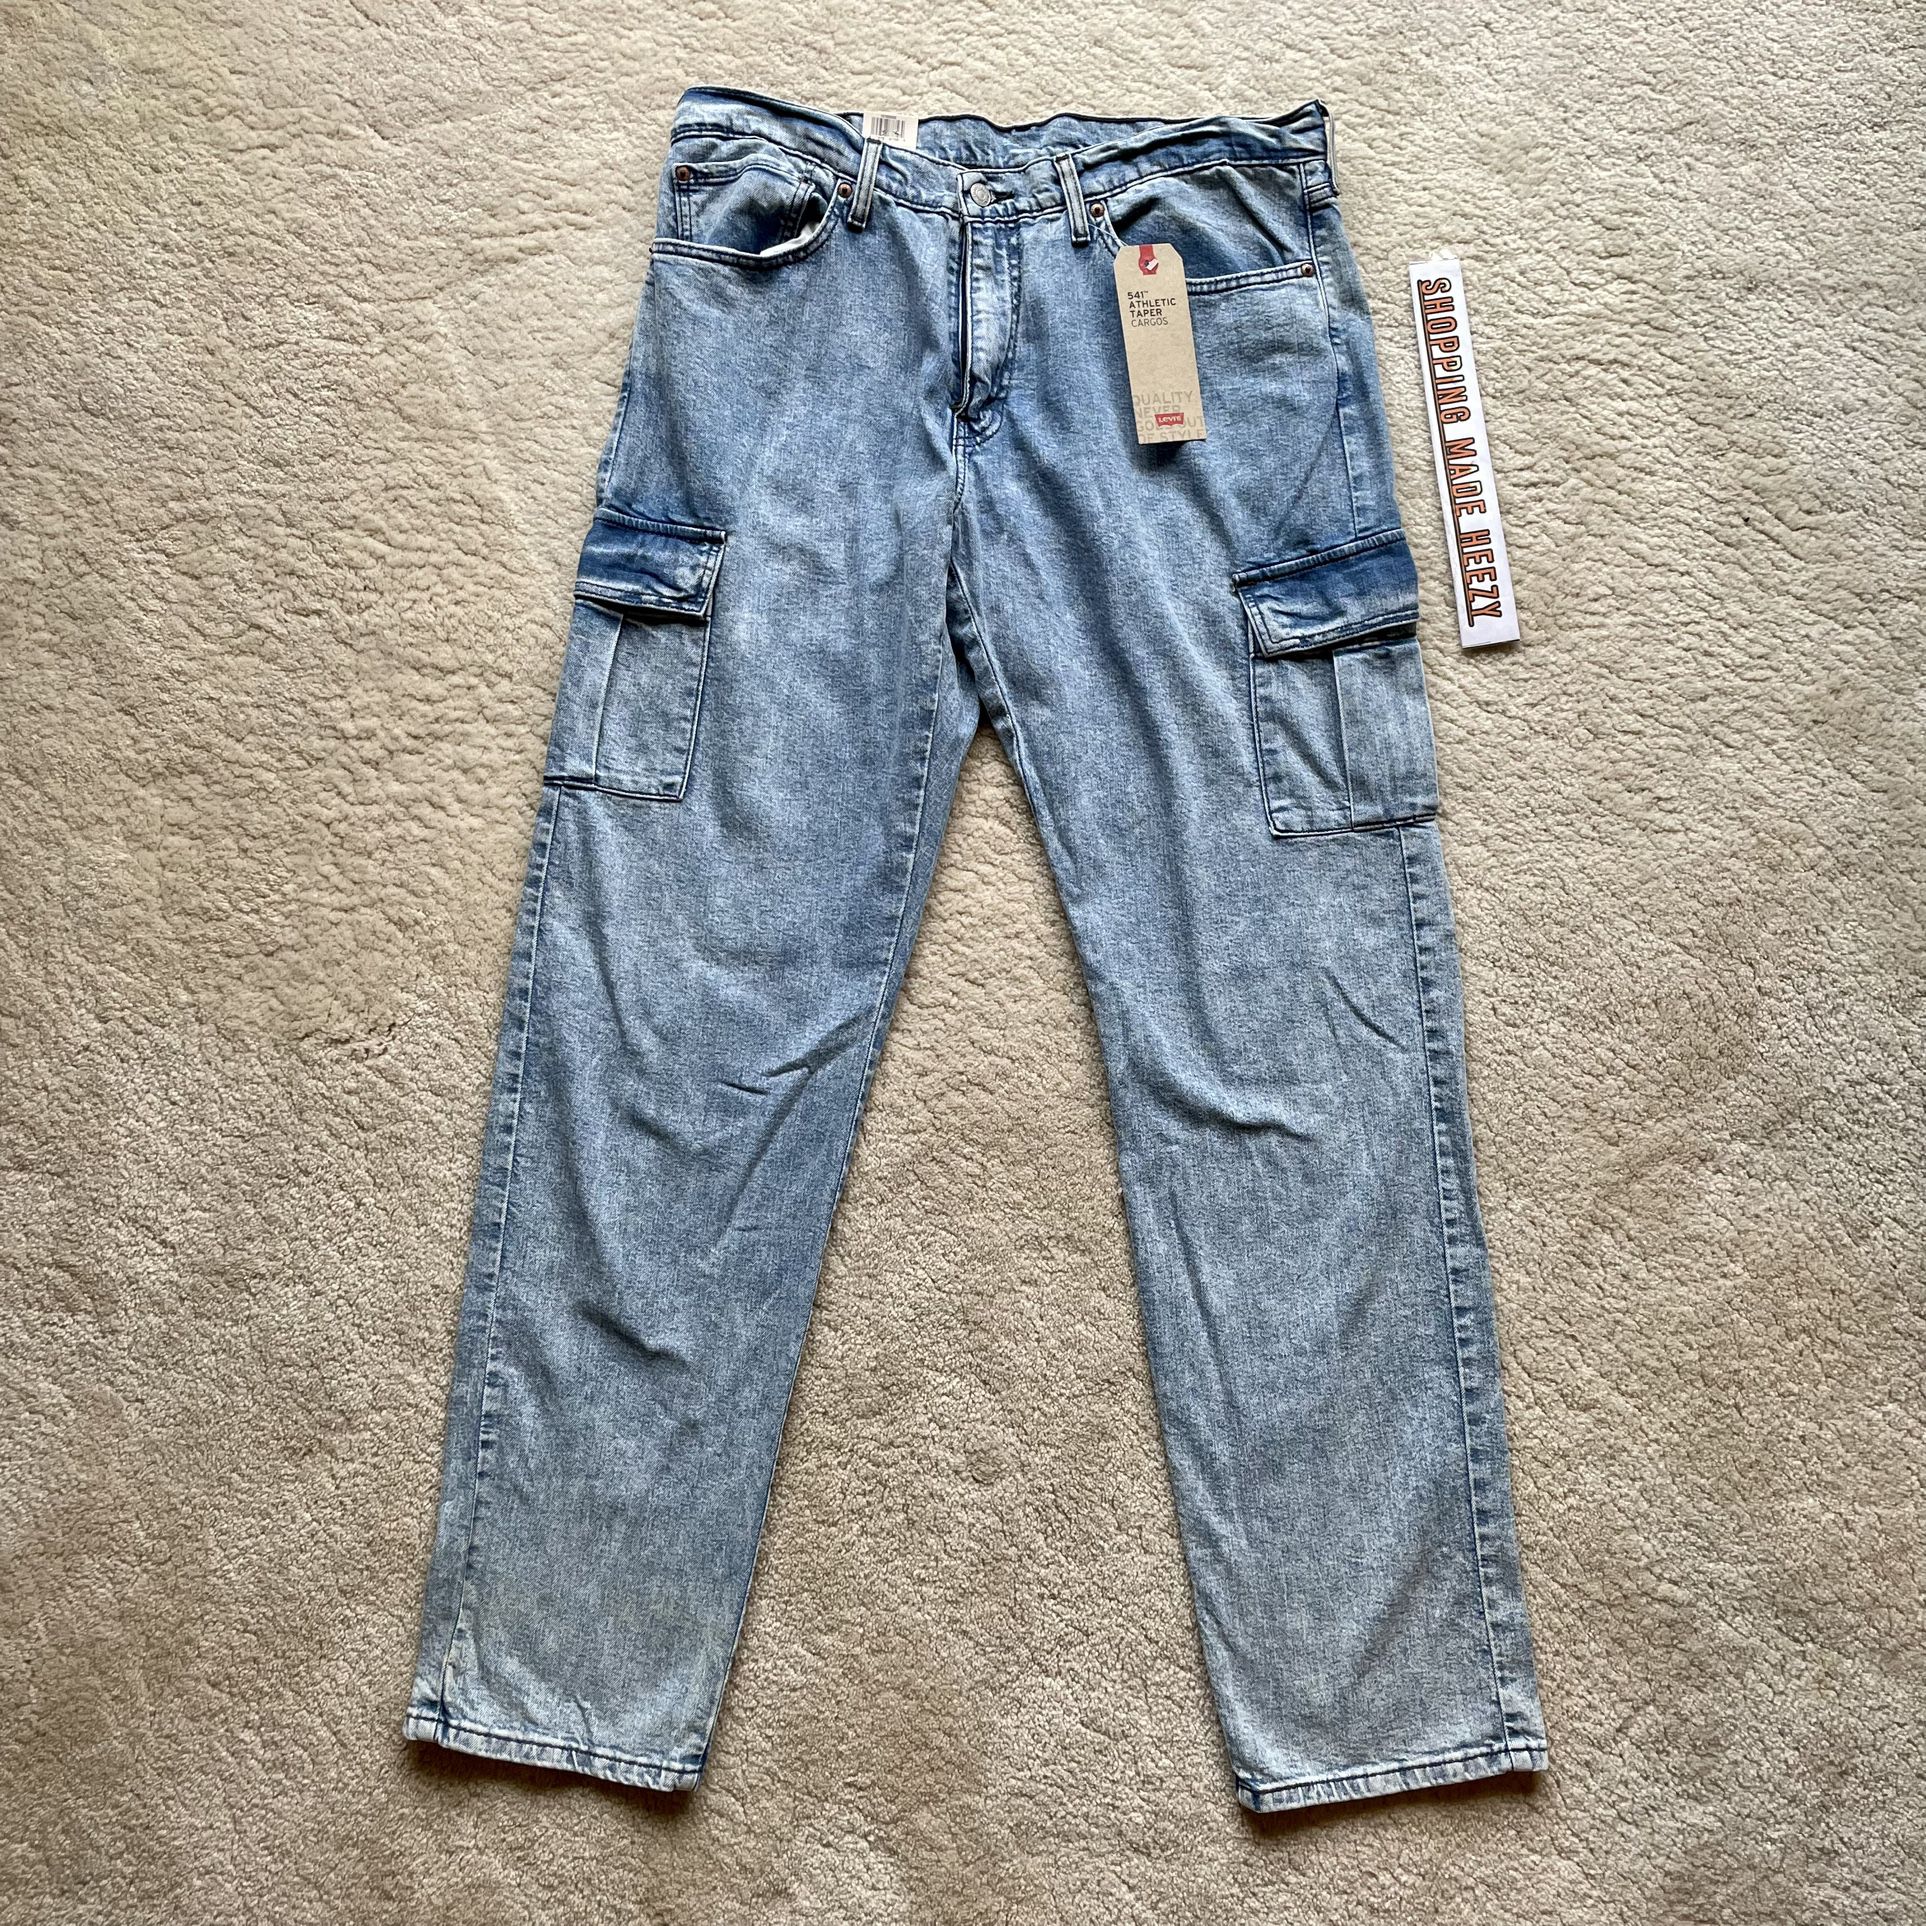 [34x36] Levis Stretch 541 Athletic Taper Cargos Mens Jeans Irregular  Pakistan for Sale in Plano, TX - OfferUp